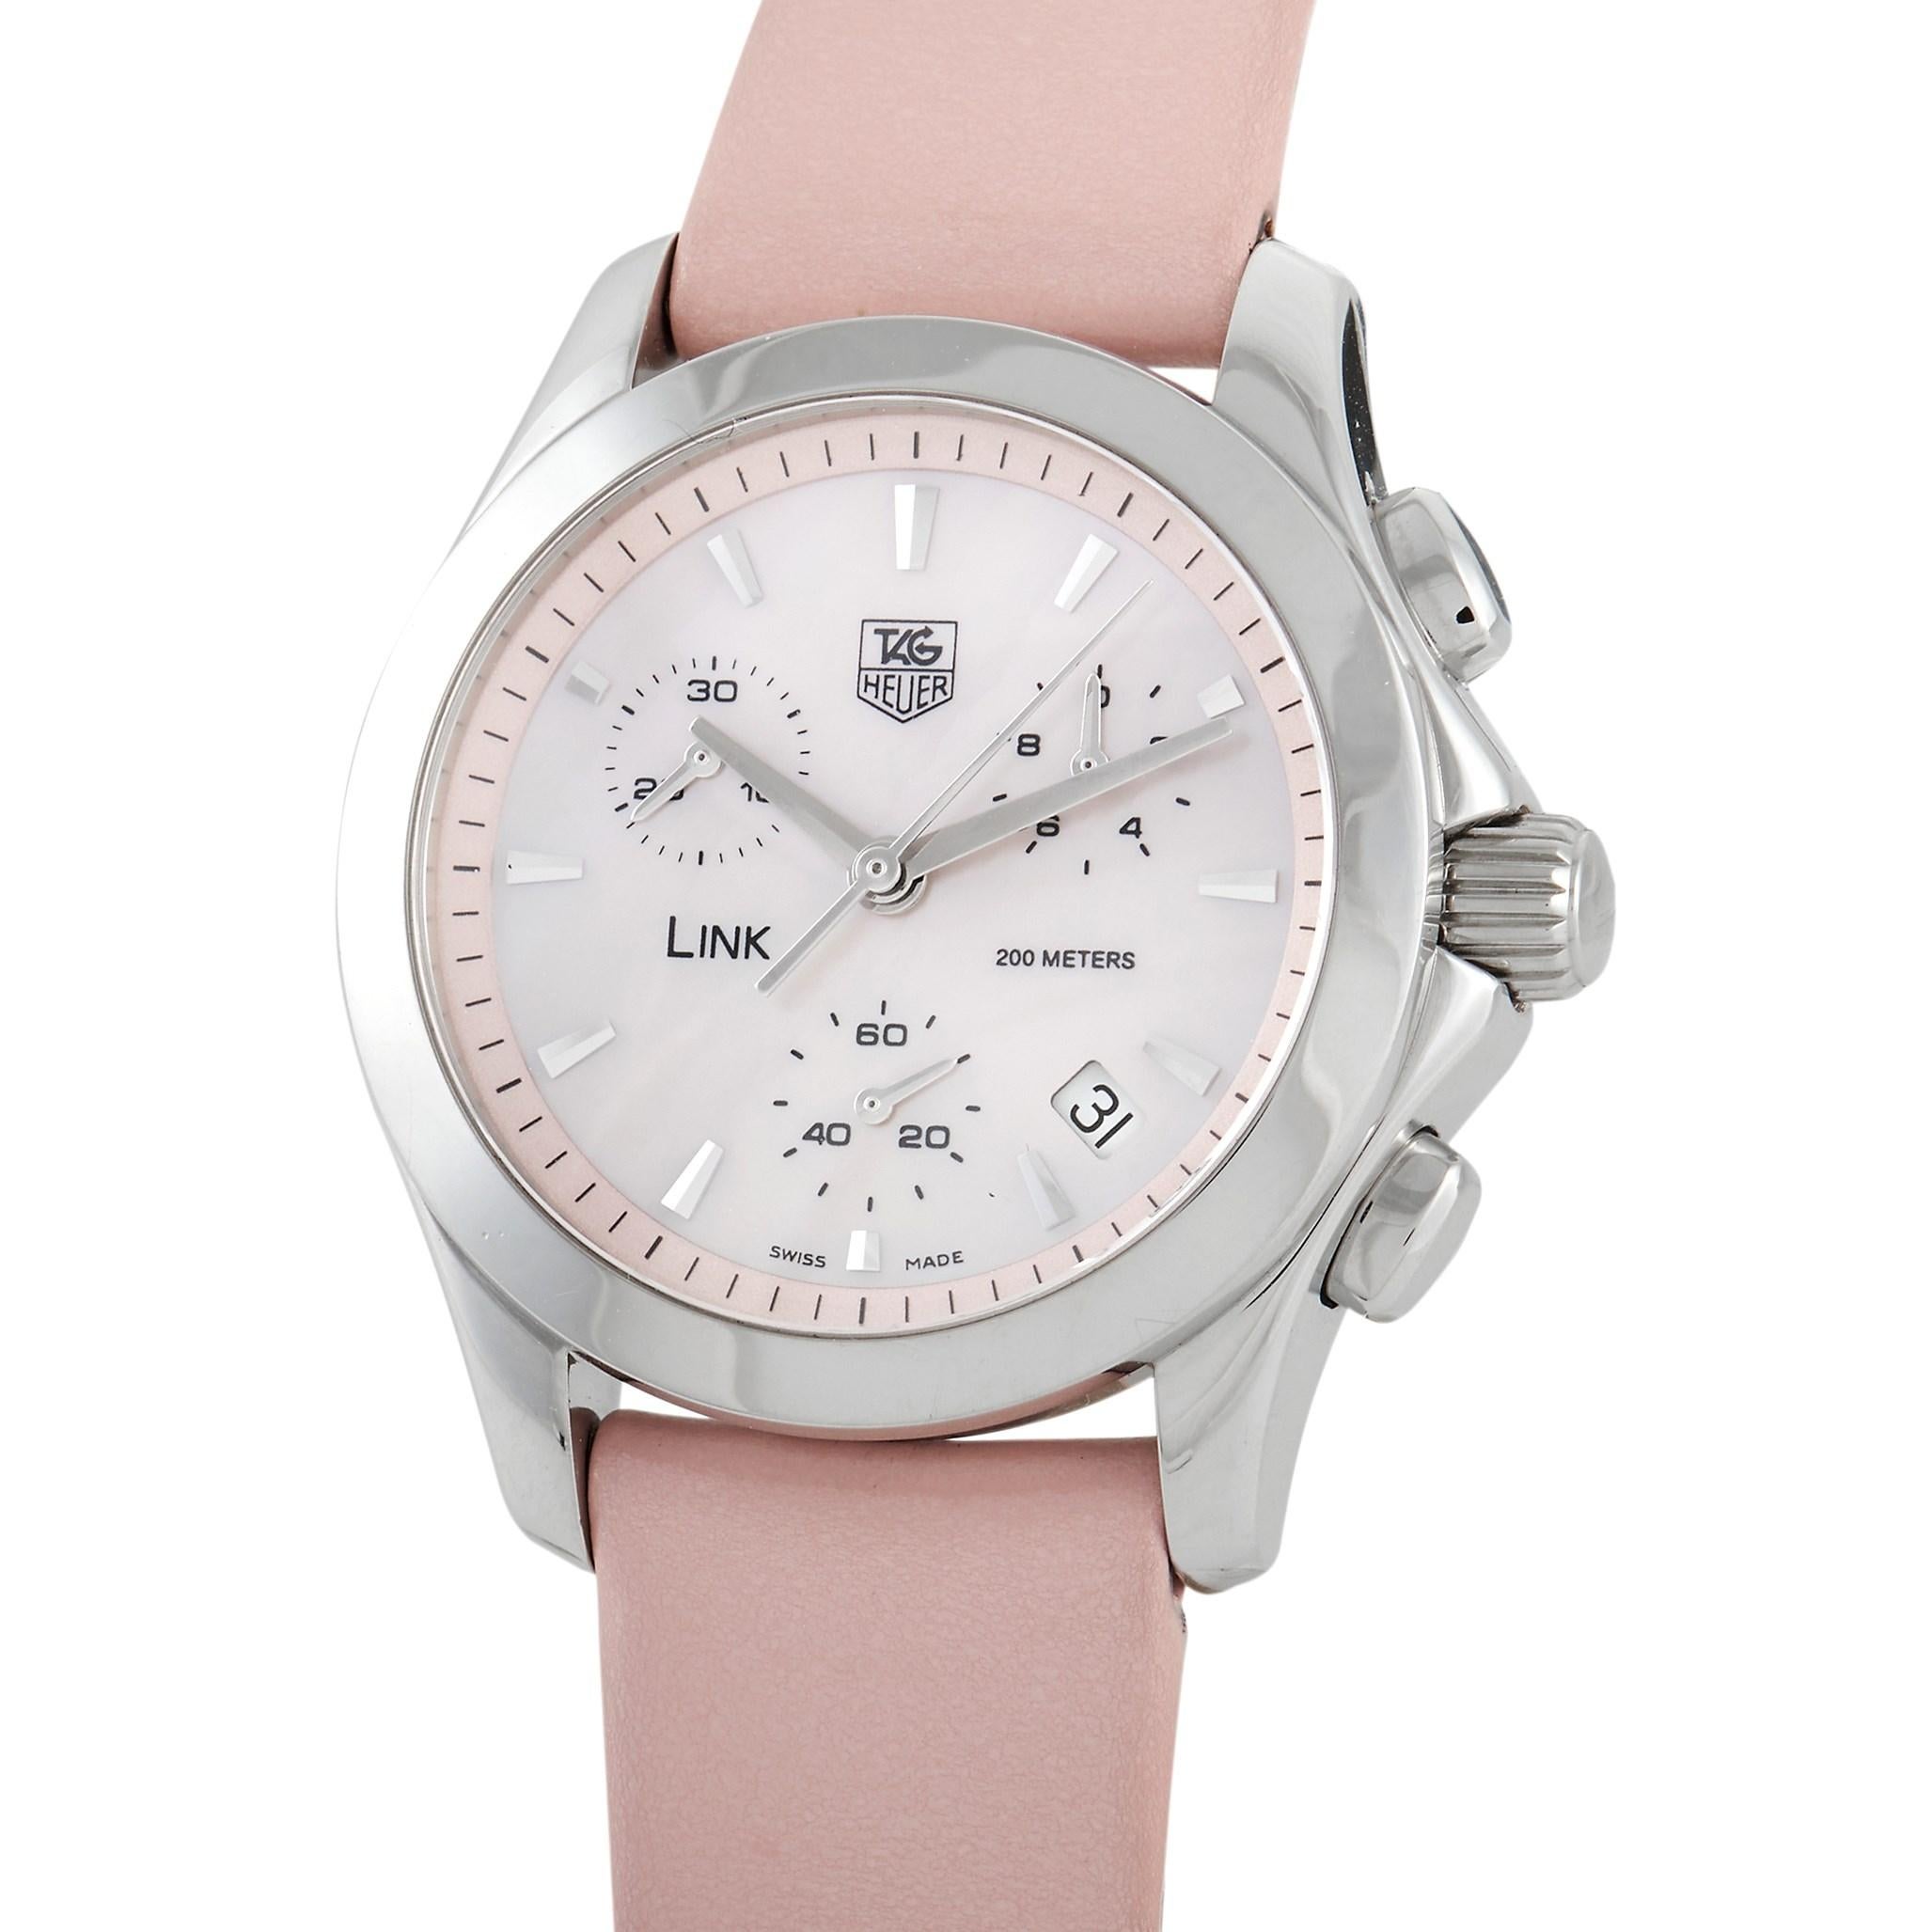 The blushing beauty of Tag Heuer Link Chronograph Pink Ladies Watch CJF1311 will attract eyes. Designed to look casual yet refined, this timepiece features a 33mm round stainless steel case paired with a pink Mother of Pearl dial. Three subdials are